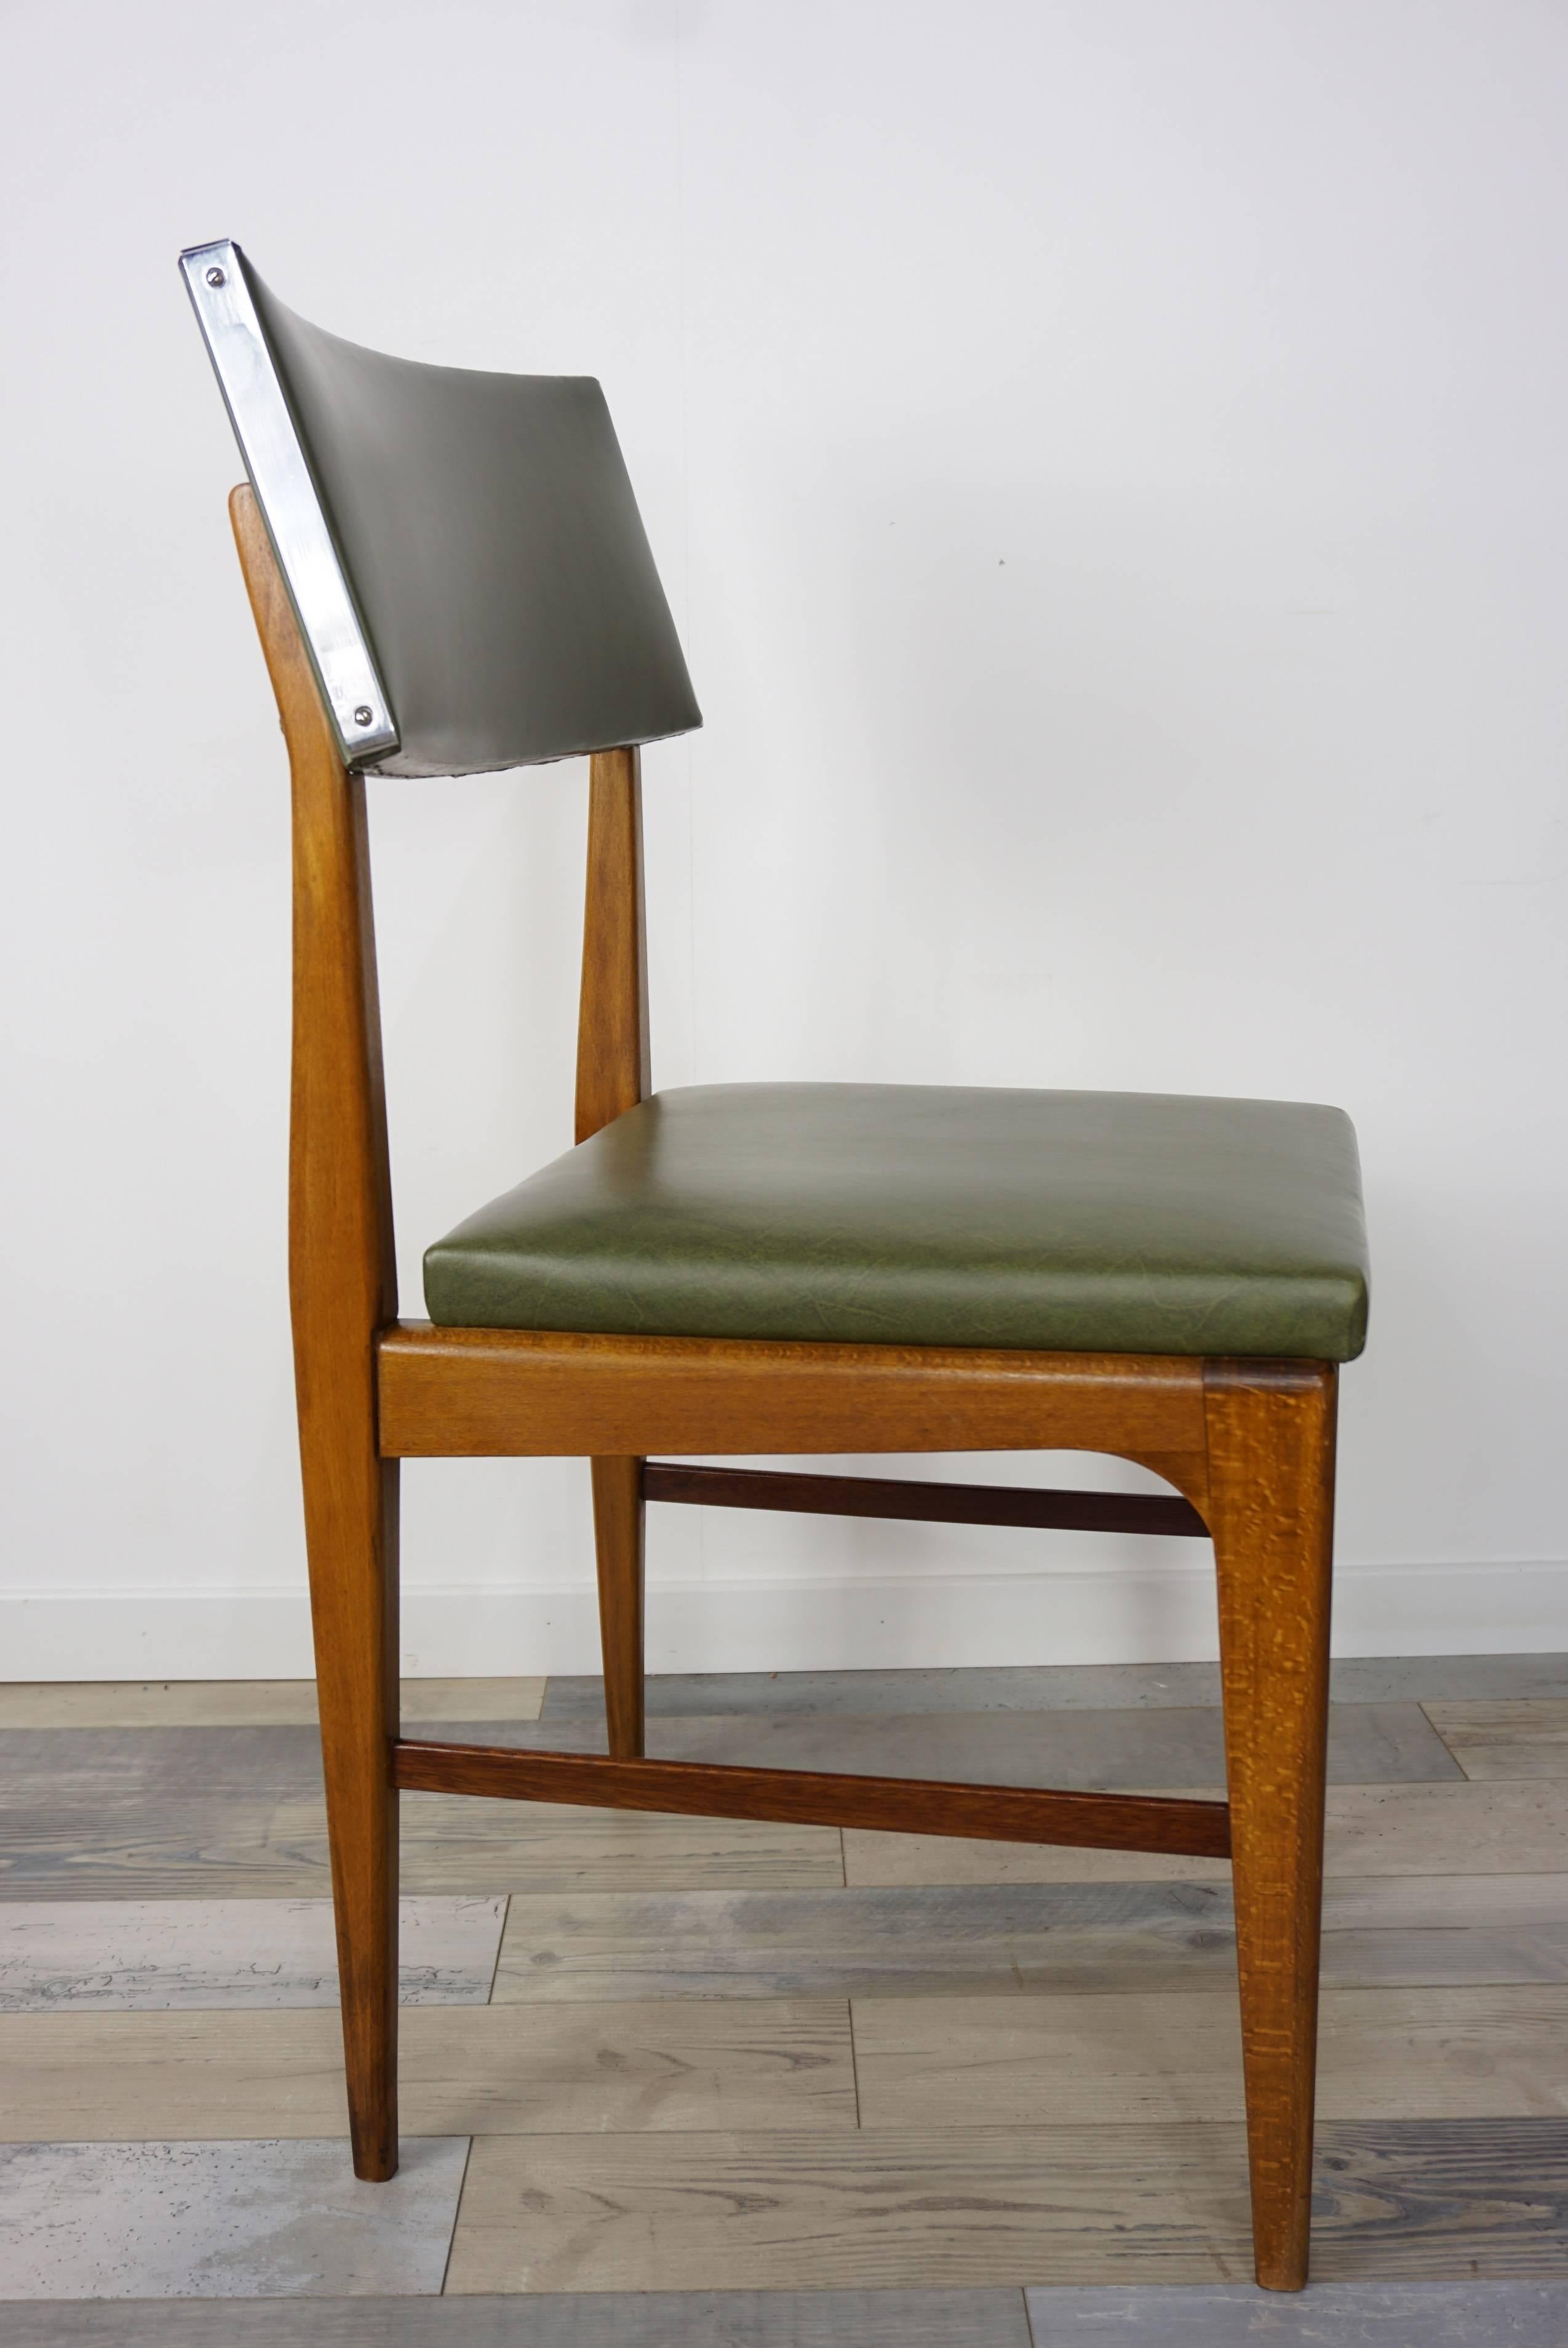 Wooden teak and green faux leather Scandinavian style Dutch design chair.